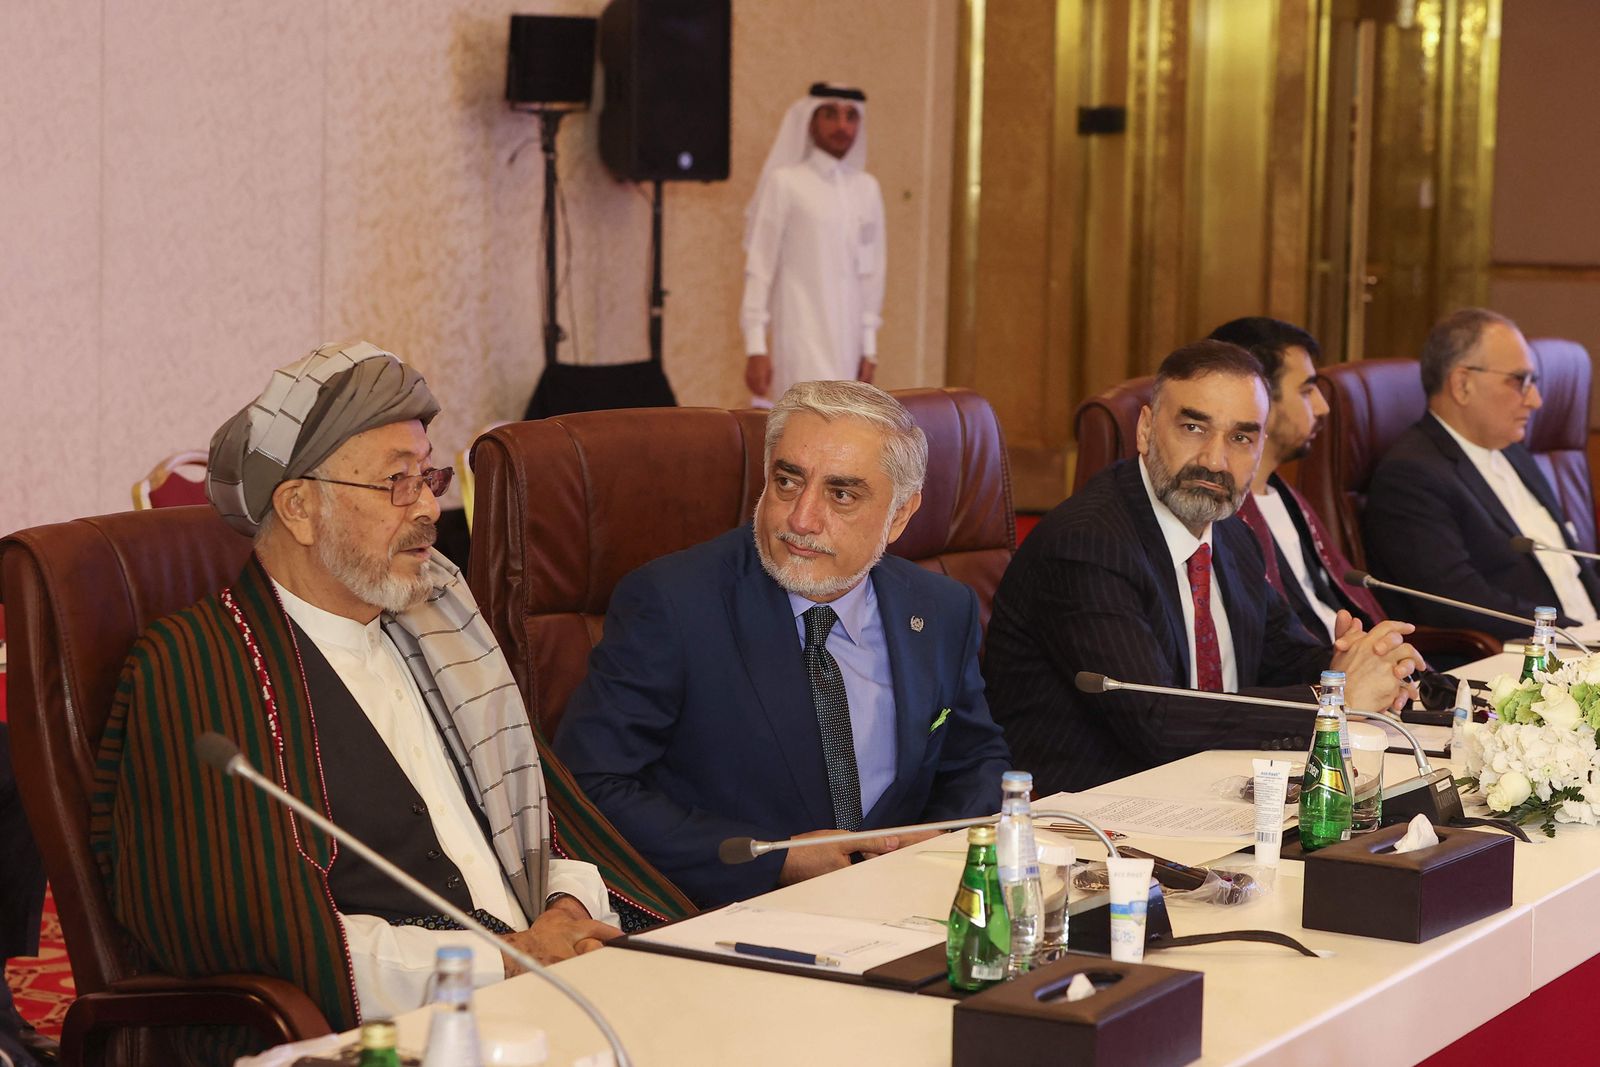 Afghanistan's former chief executive Abdullah Abdullah (2nd L) attends a session of the peace talks between the Afghan government and the Taliban in the Qatari capital Doha, on July 17, 2021. (Photo by KARIM JAAFAR / AFP) - AFP